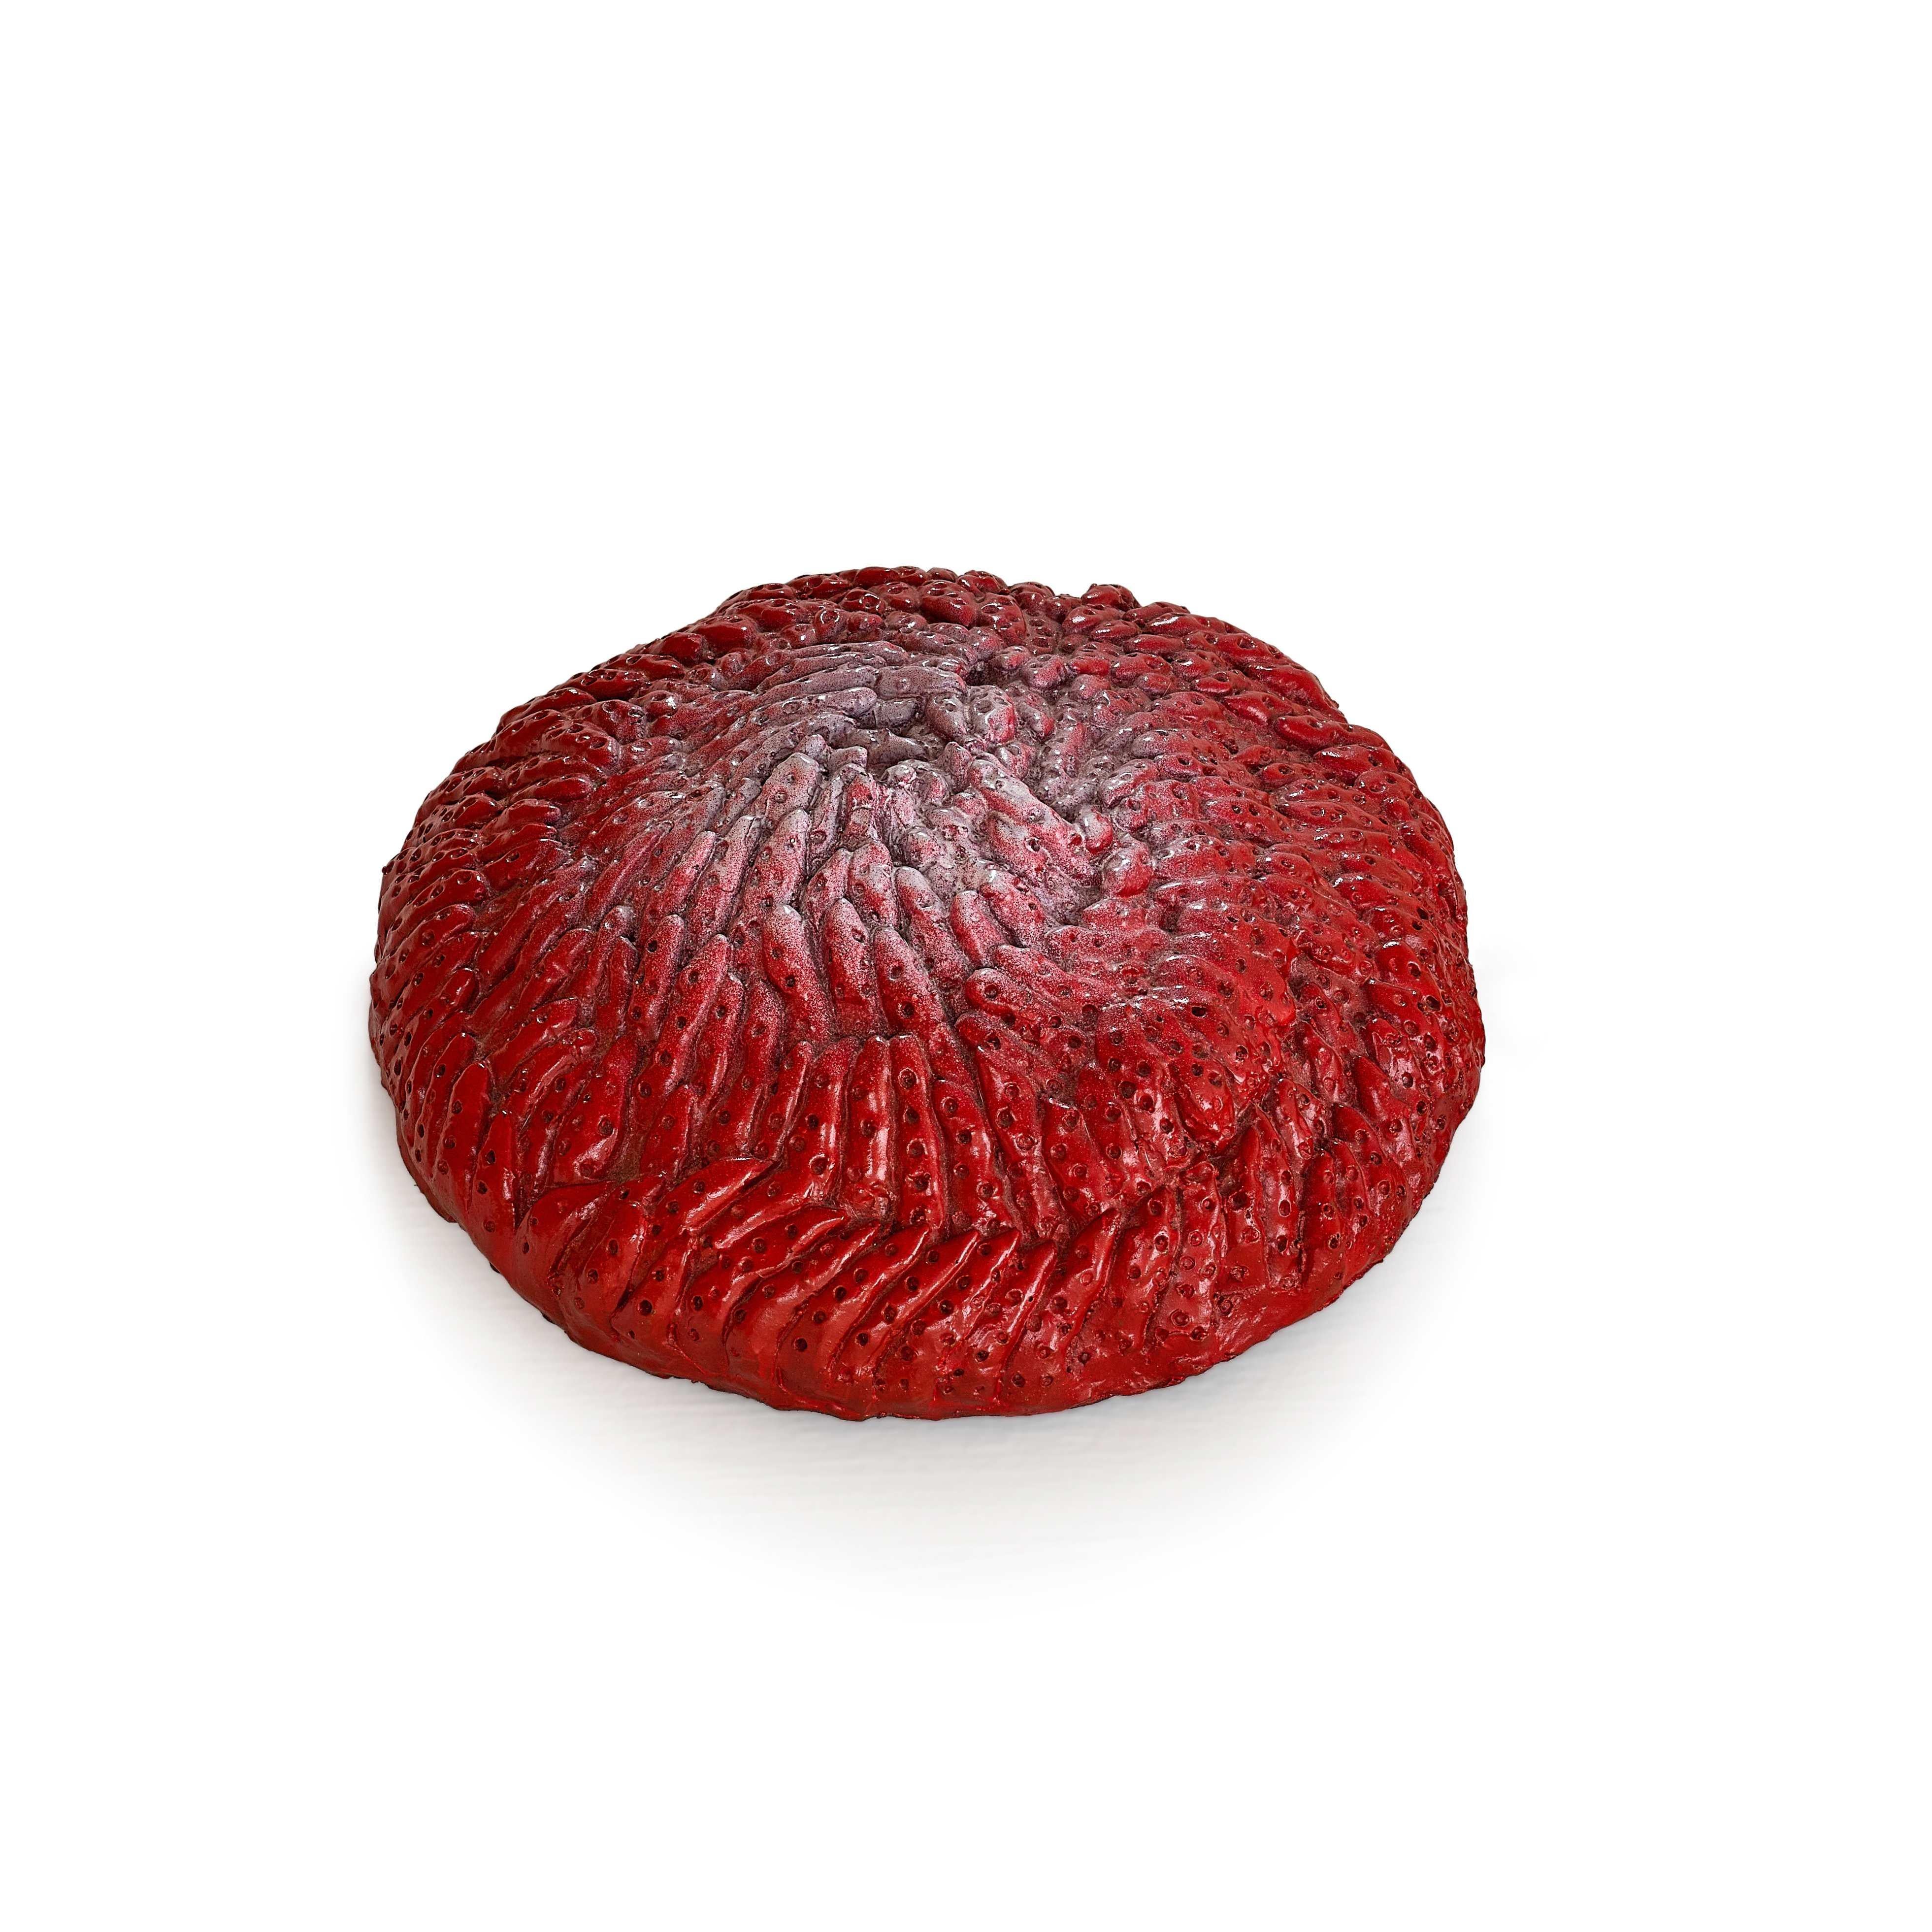 Strawberry 1. Bronze Sculpture by Yayoi Kusama (1974/93) Limited Edition of 30 For Sale 2